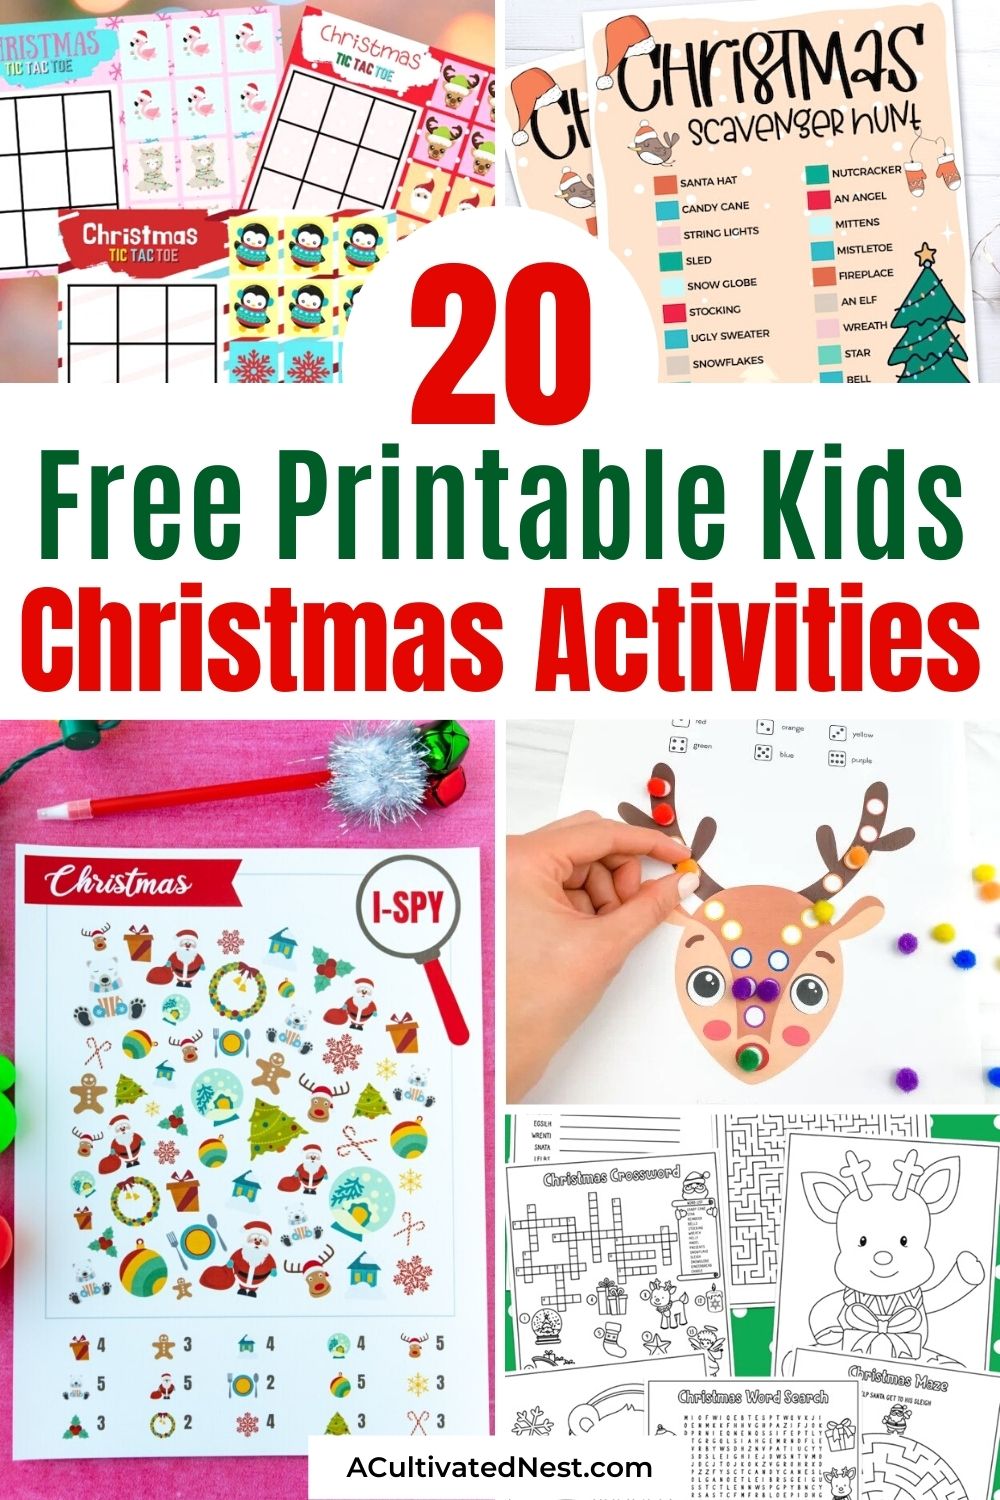 20 Free Printable Christmas Activities for Kids- If you want to get your kids in the holiday spirit, a fun and frugal ways is with these fun free printable Christmas activities for kids! | free printable activity sheets for kids, Christmas activities for kids, #freePrintables #kidsActivities #ChristmasGames #kidsPrintables #ACultivatedNest